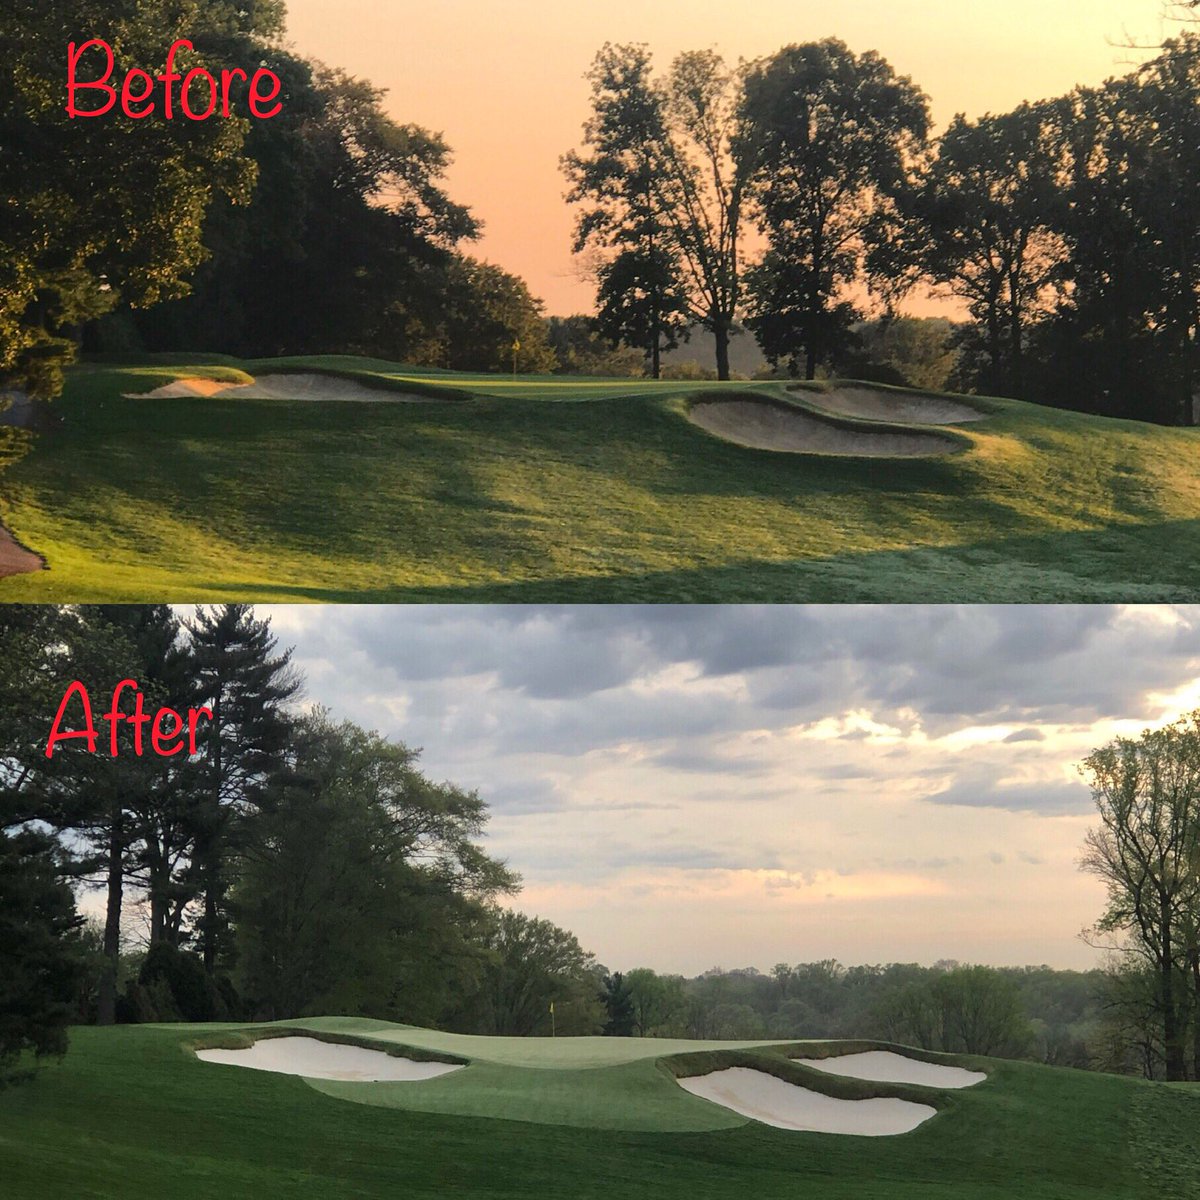 In September, I told you all to stay tuned! Here is a before and after of the 6th at @rggc1926 😳  And again stay tuned for more...⛳️🚜🚧#RollingGreen #RG #RGProud #RGGC #RGGC1926 #RollingGreenGolfClub #Vision2026 #WilliamFlynnDesign #RestoringFlynn #PhiladelphiaGolf